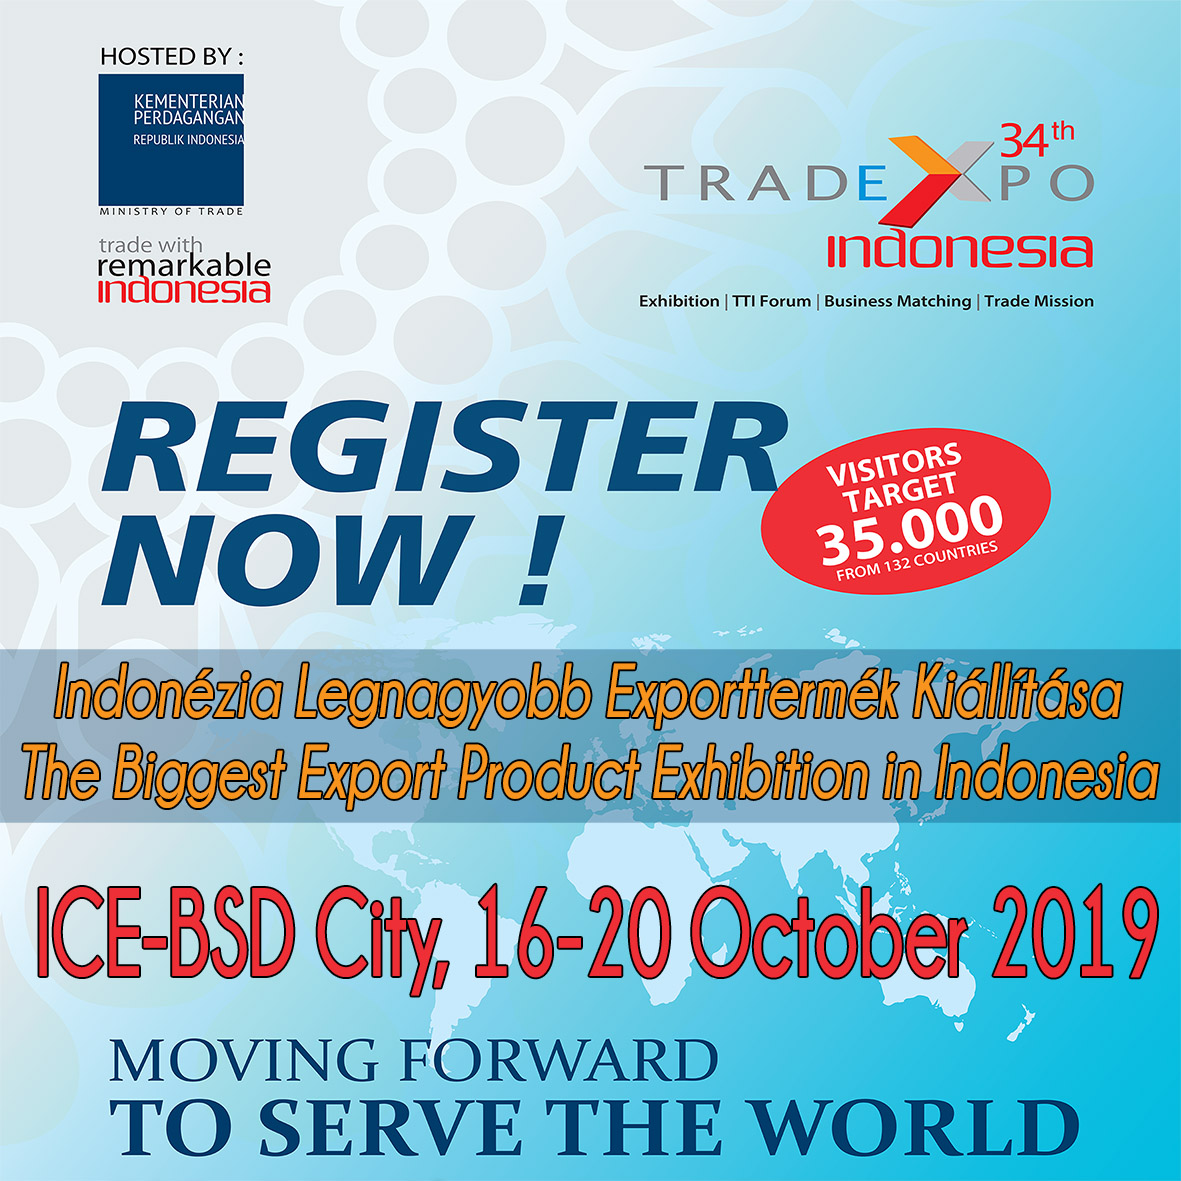 TRADE EXPO INDONESIA 2019 - Indonesian Trade Promotion Center ...